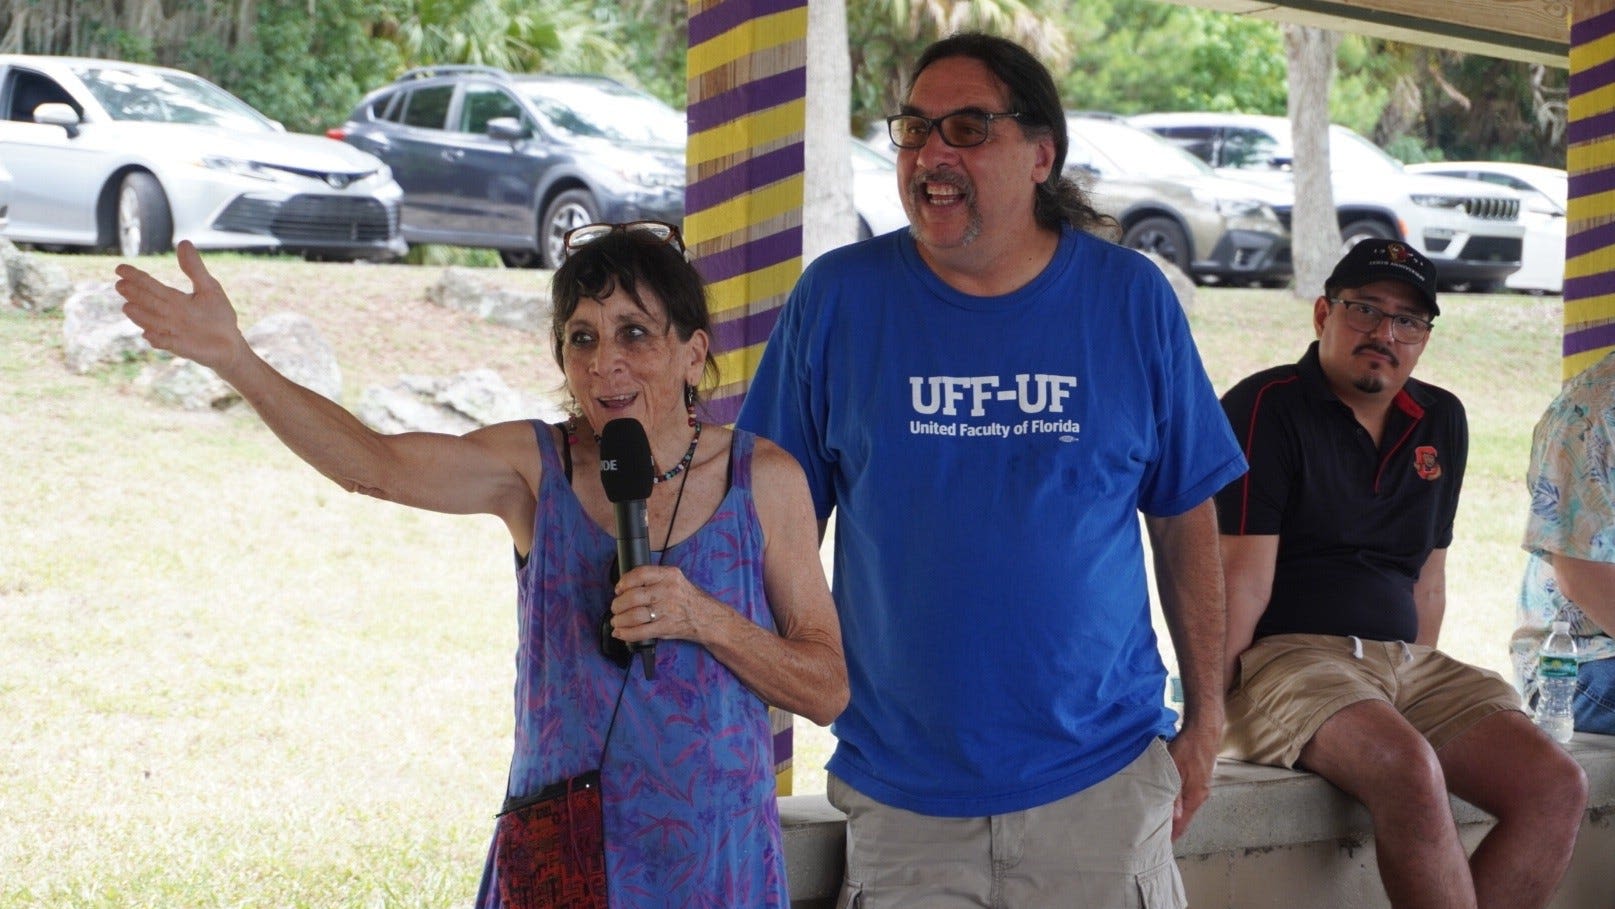 UF, Gainesville communities bid farewell to couple known for community activism